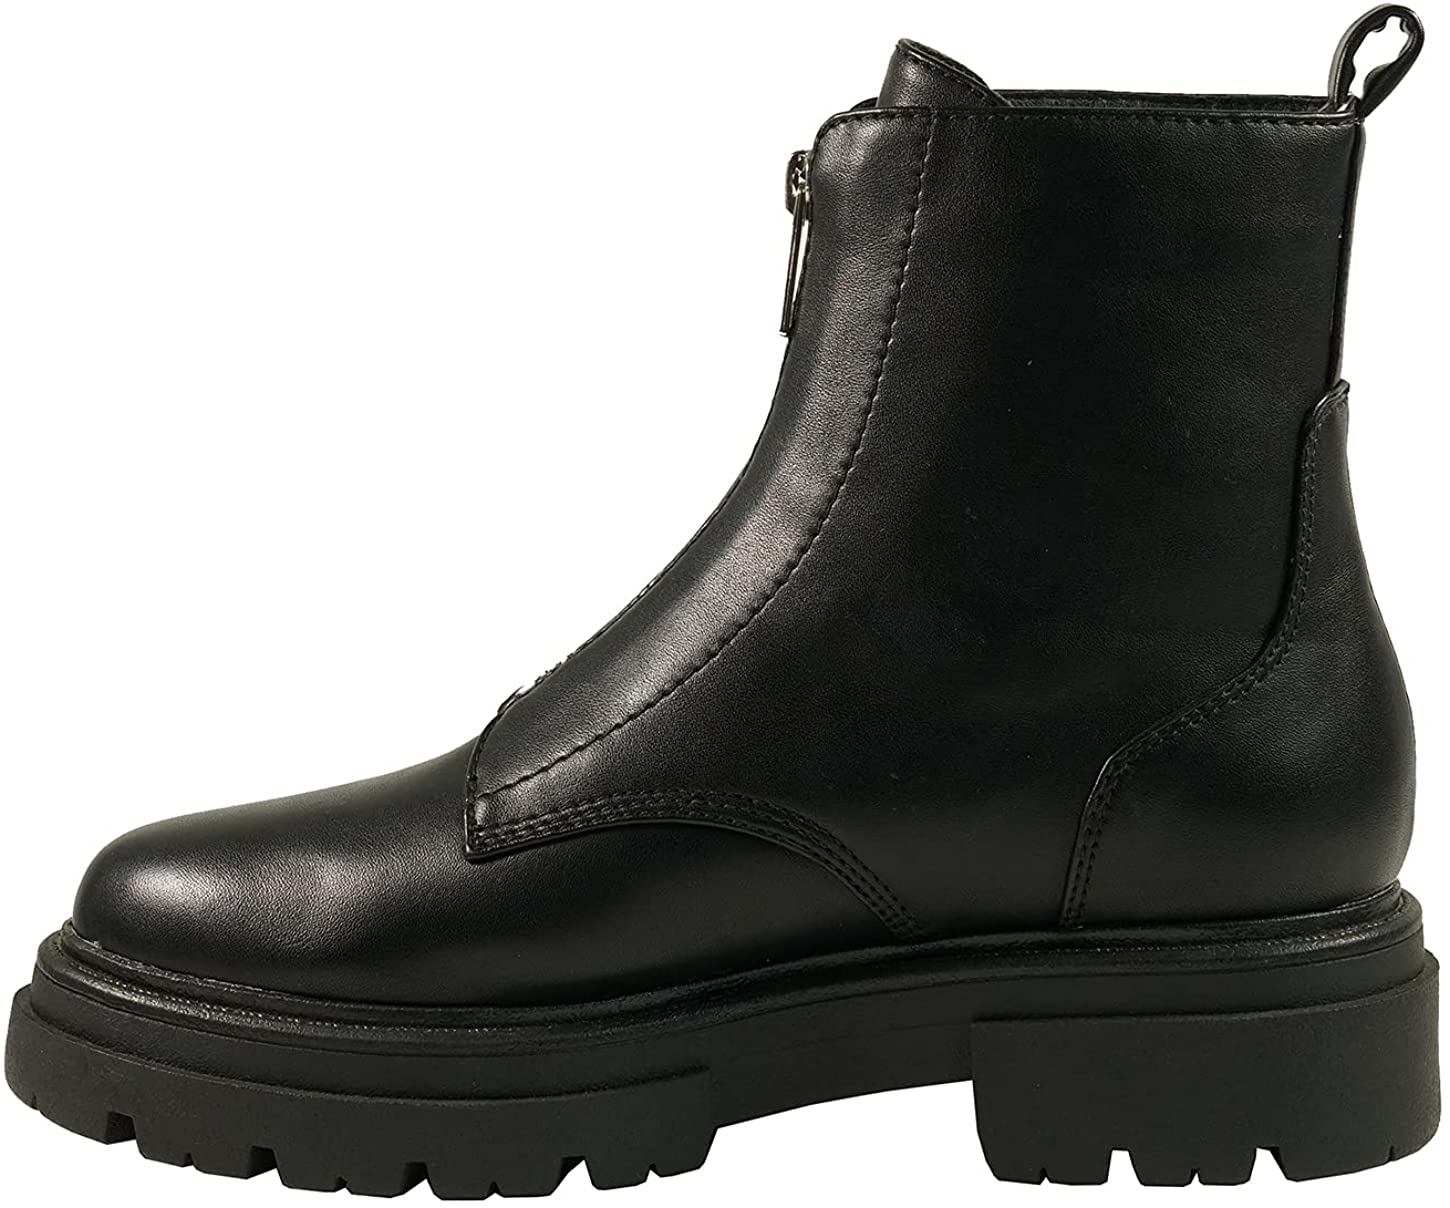 Black All Weather Paddock Boots For Women Front Zip Syntovia Boots